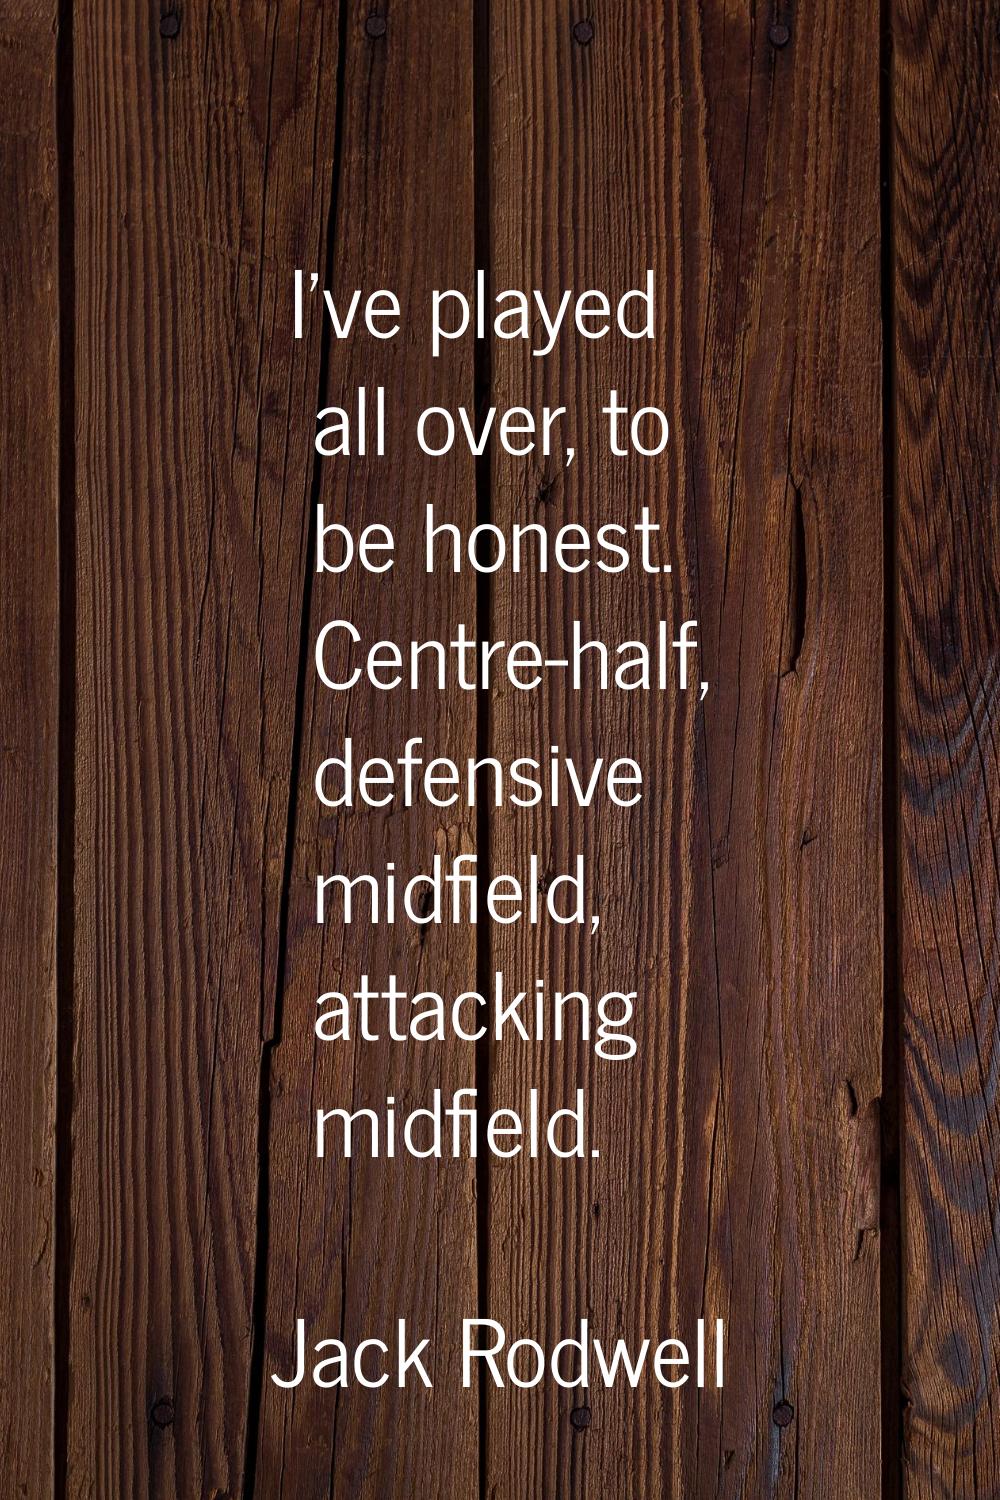 I've played all over, to be honest. Centre-half, defensive midfield, attacking midfield.